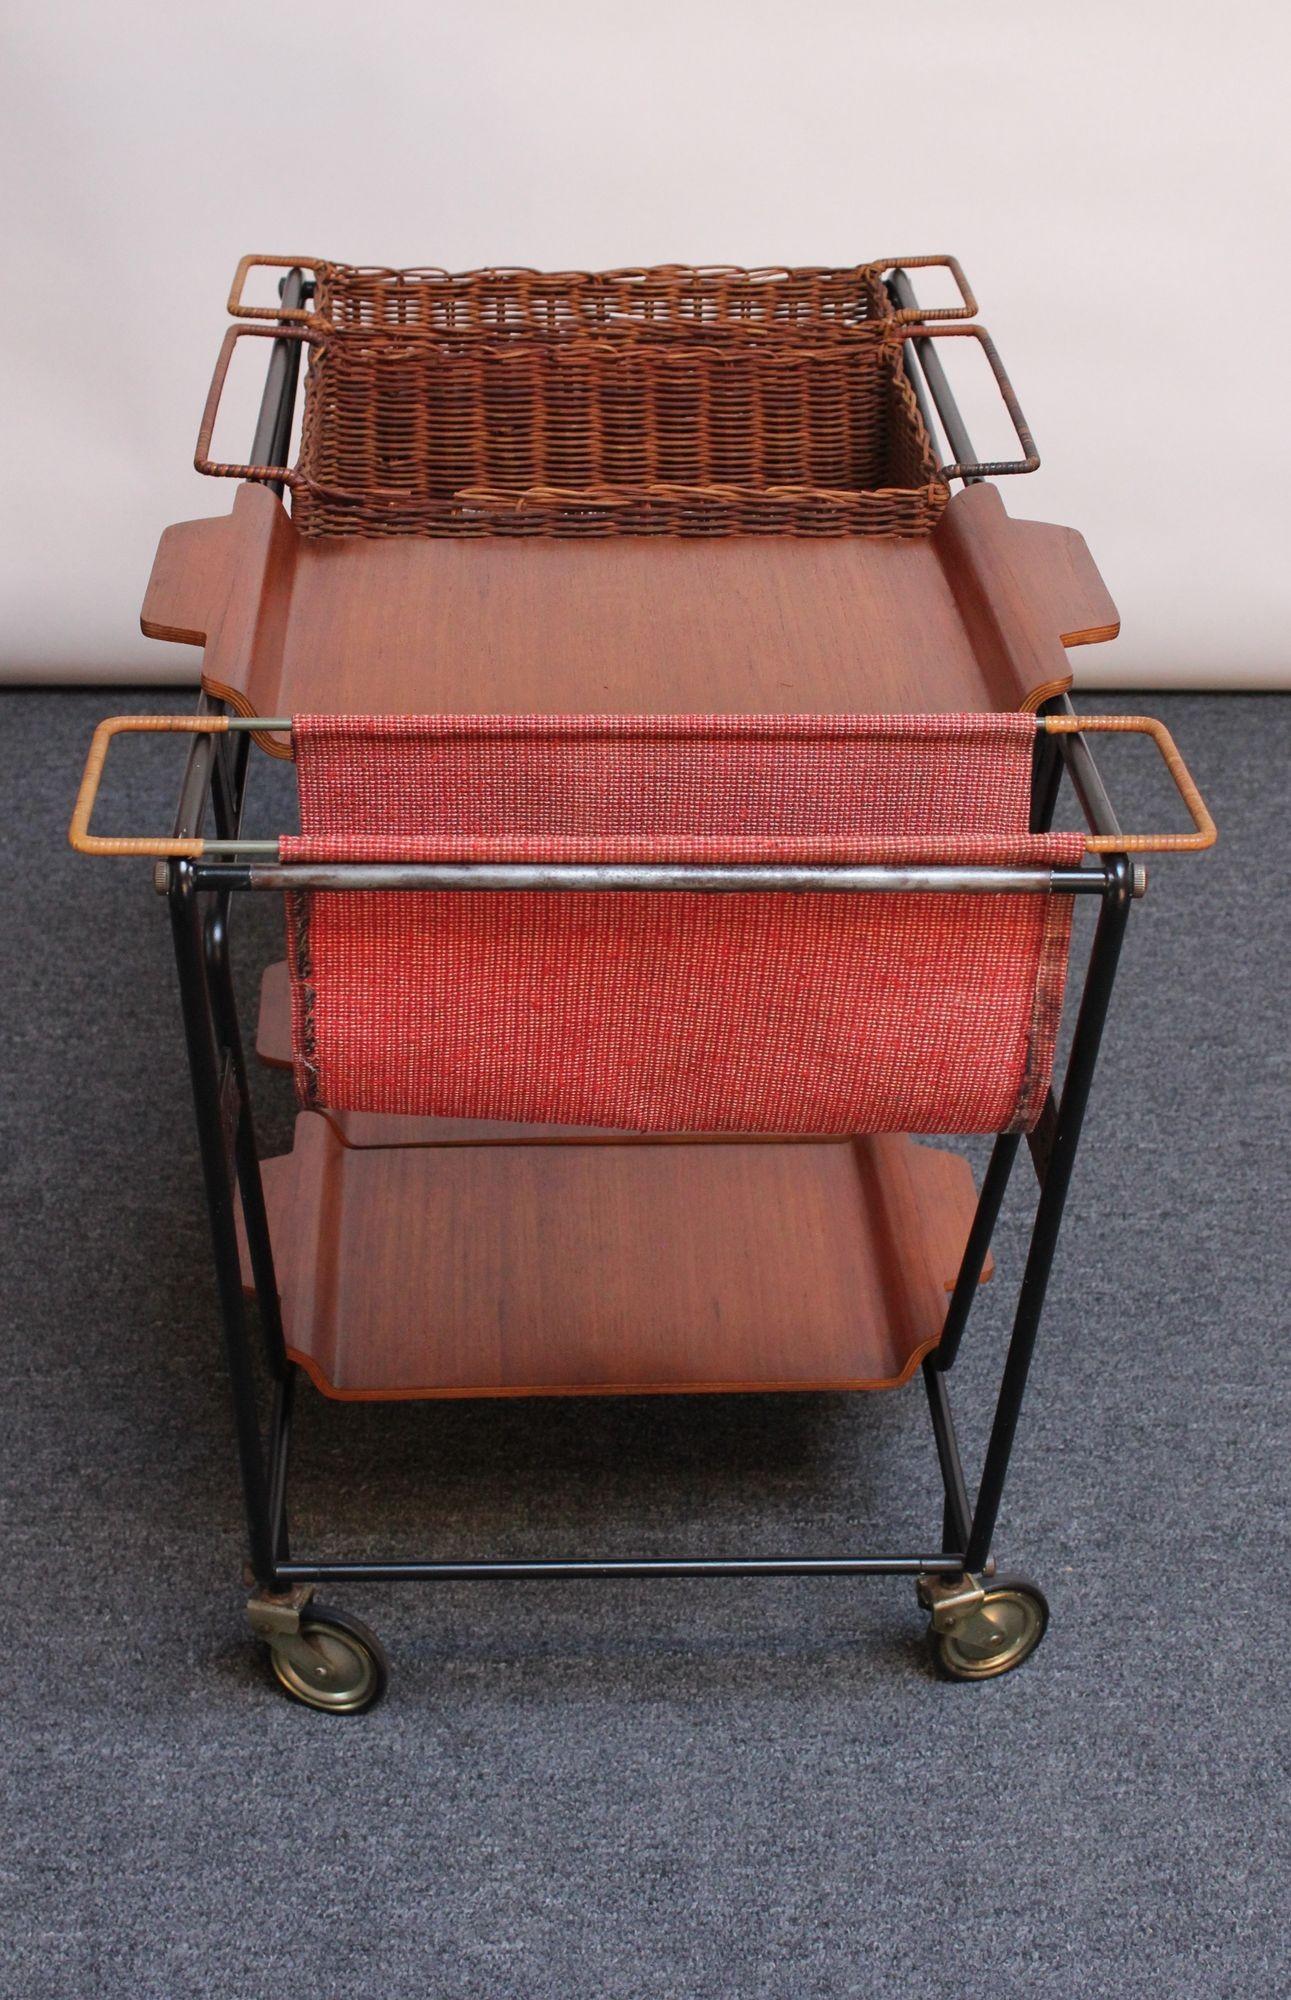 Mid-20th Century Italian Modernist Iron Bar Cart / Trolley with Plywood and Wicker Inserts For Sale